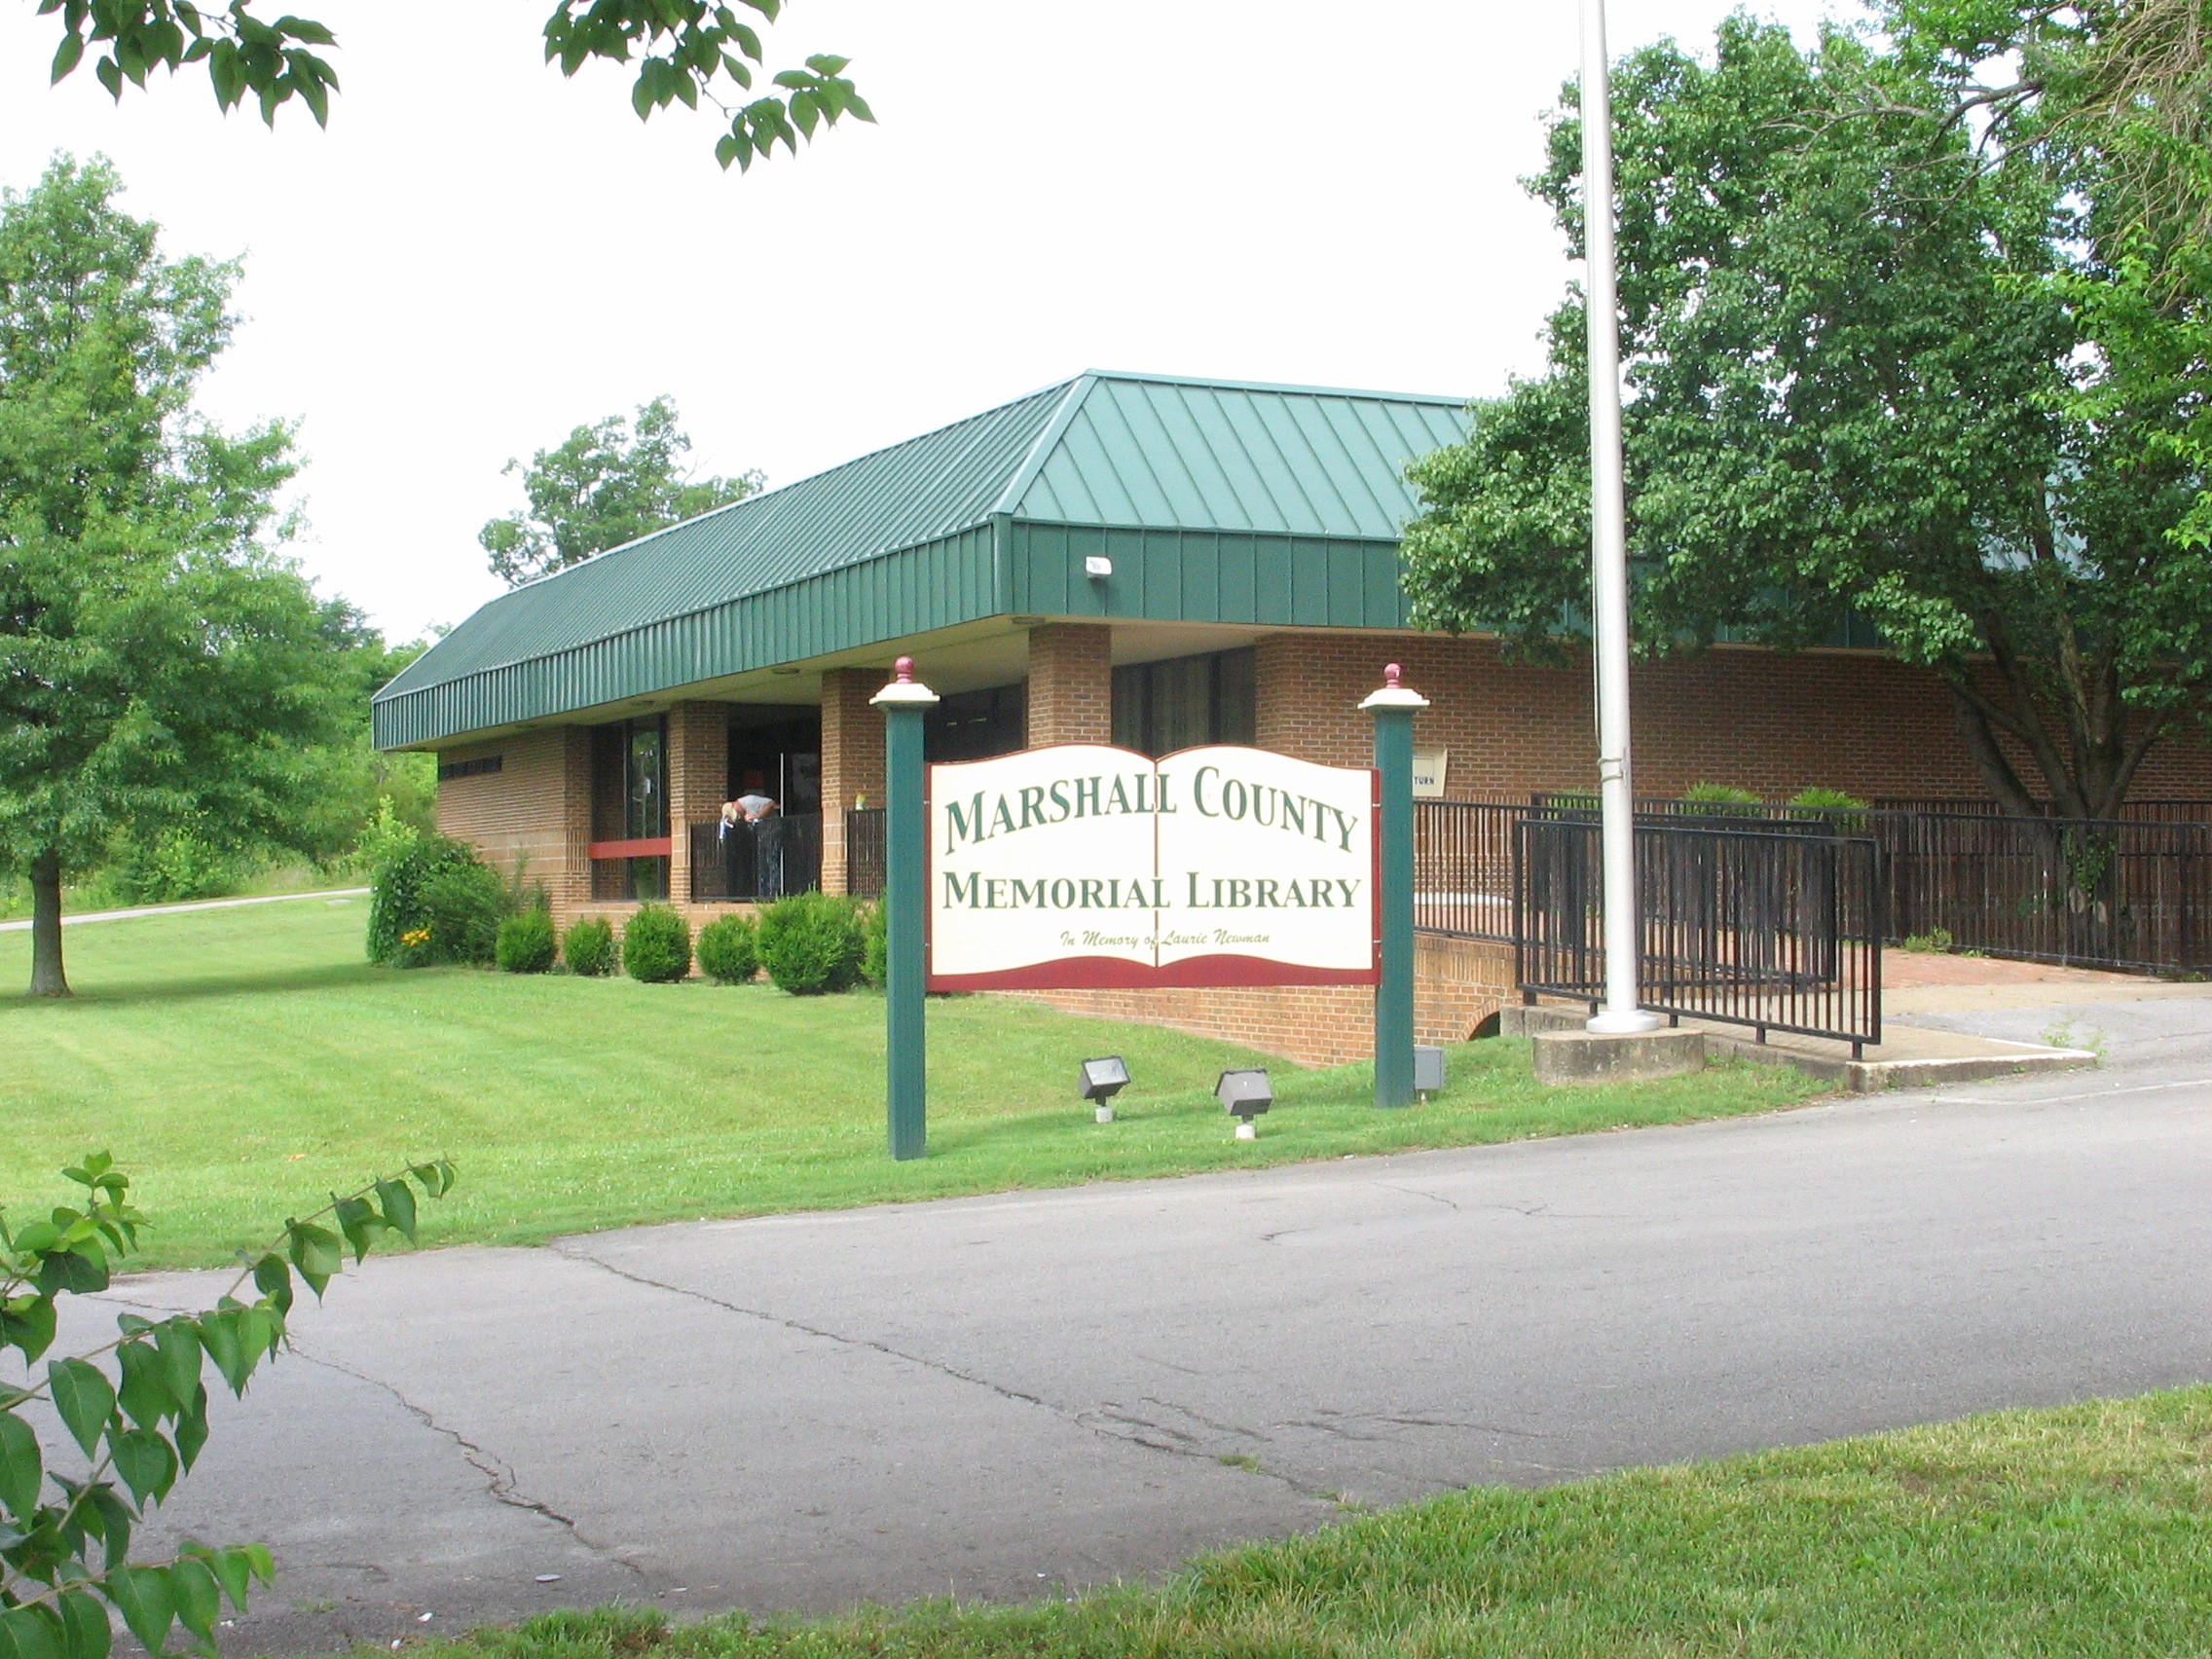 Marshall County Memorial Library